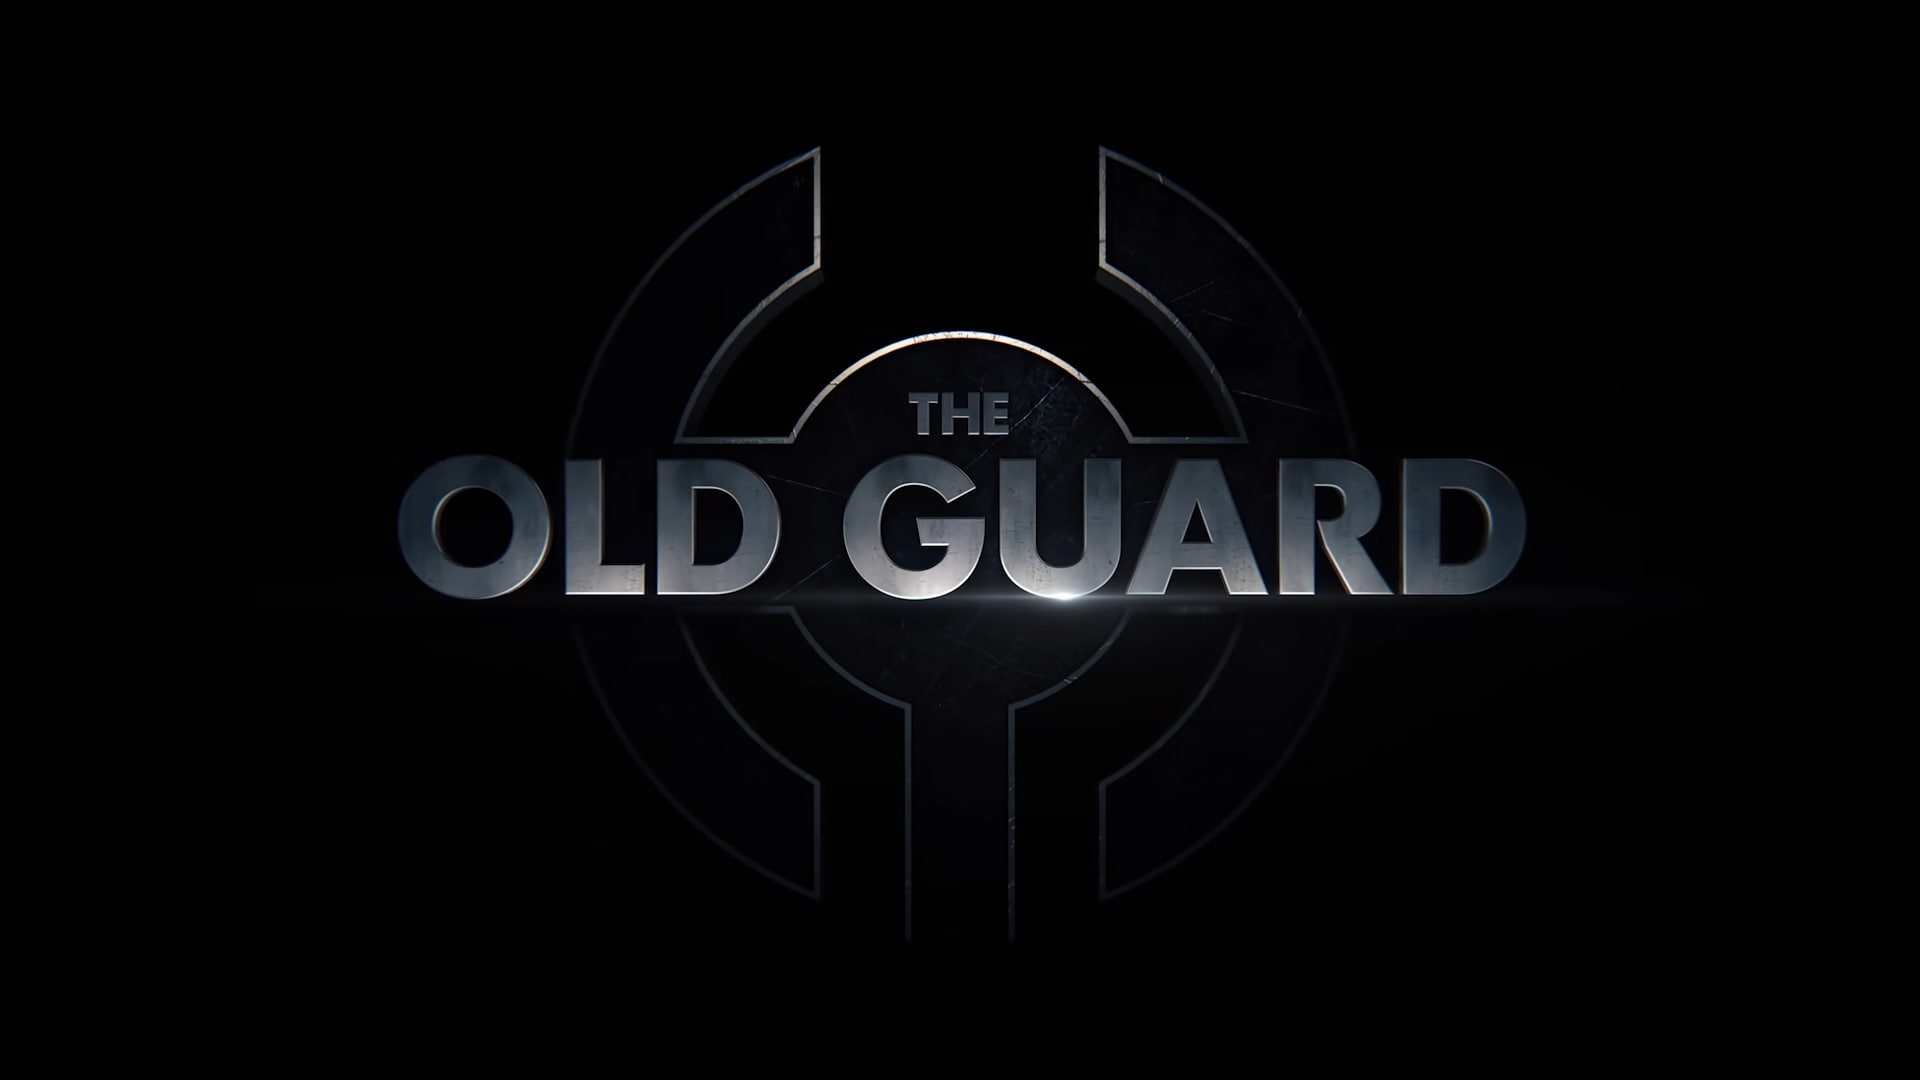 Netflix The Old Guard Trailer, Netflix Action Movie, Netflix Fantasy Movie, Coming to Netflix in July 2020